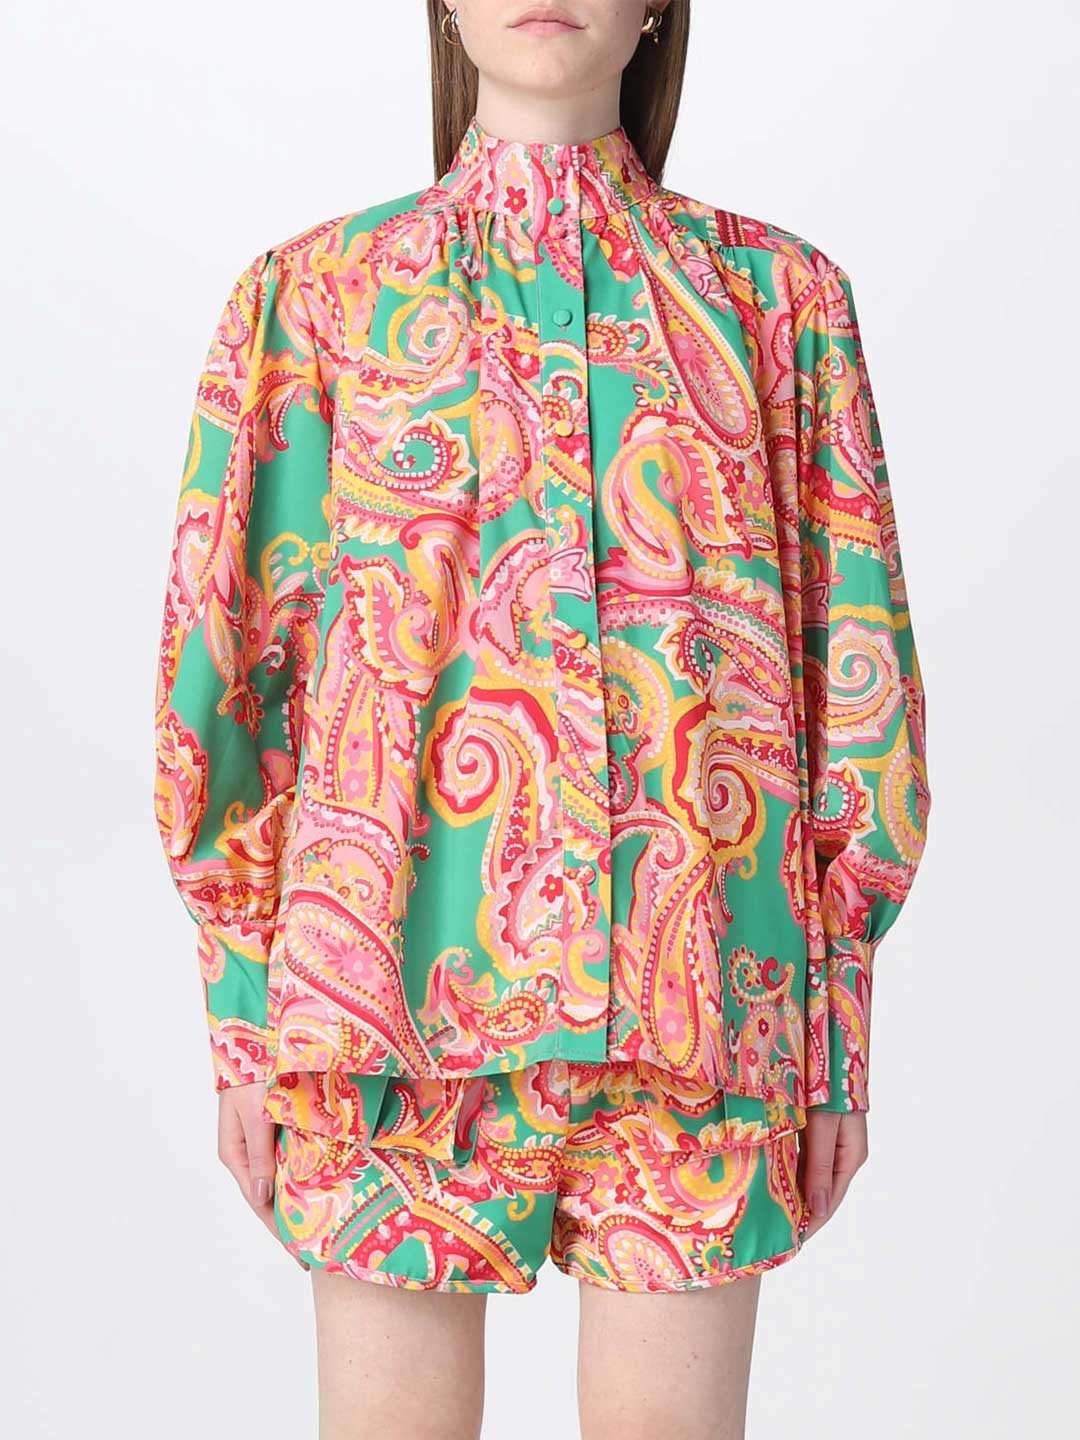 TPN Ernestine patterned shirt in printed fabric